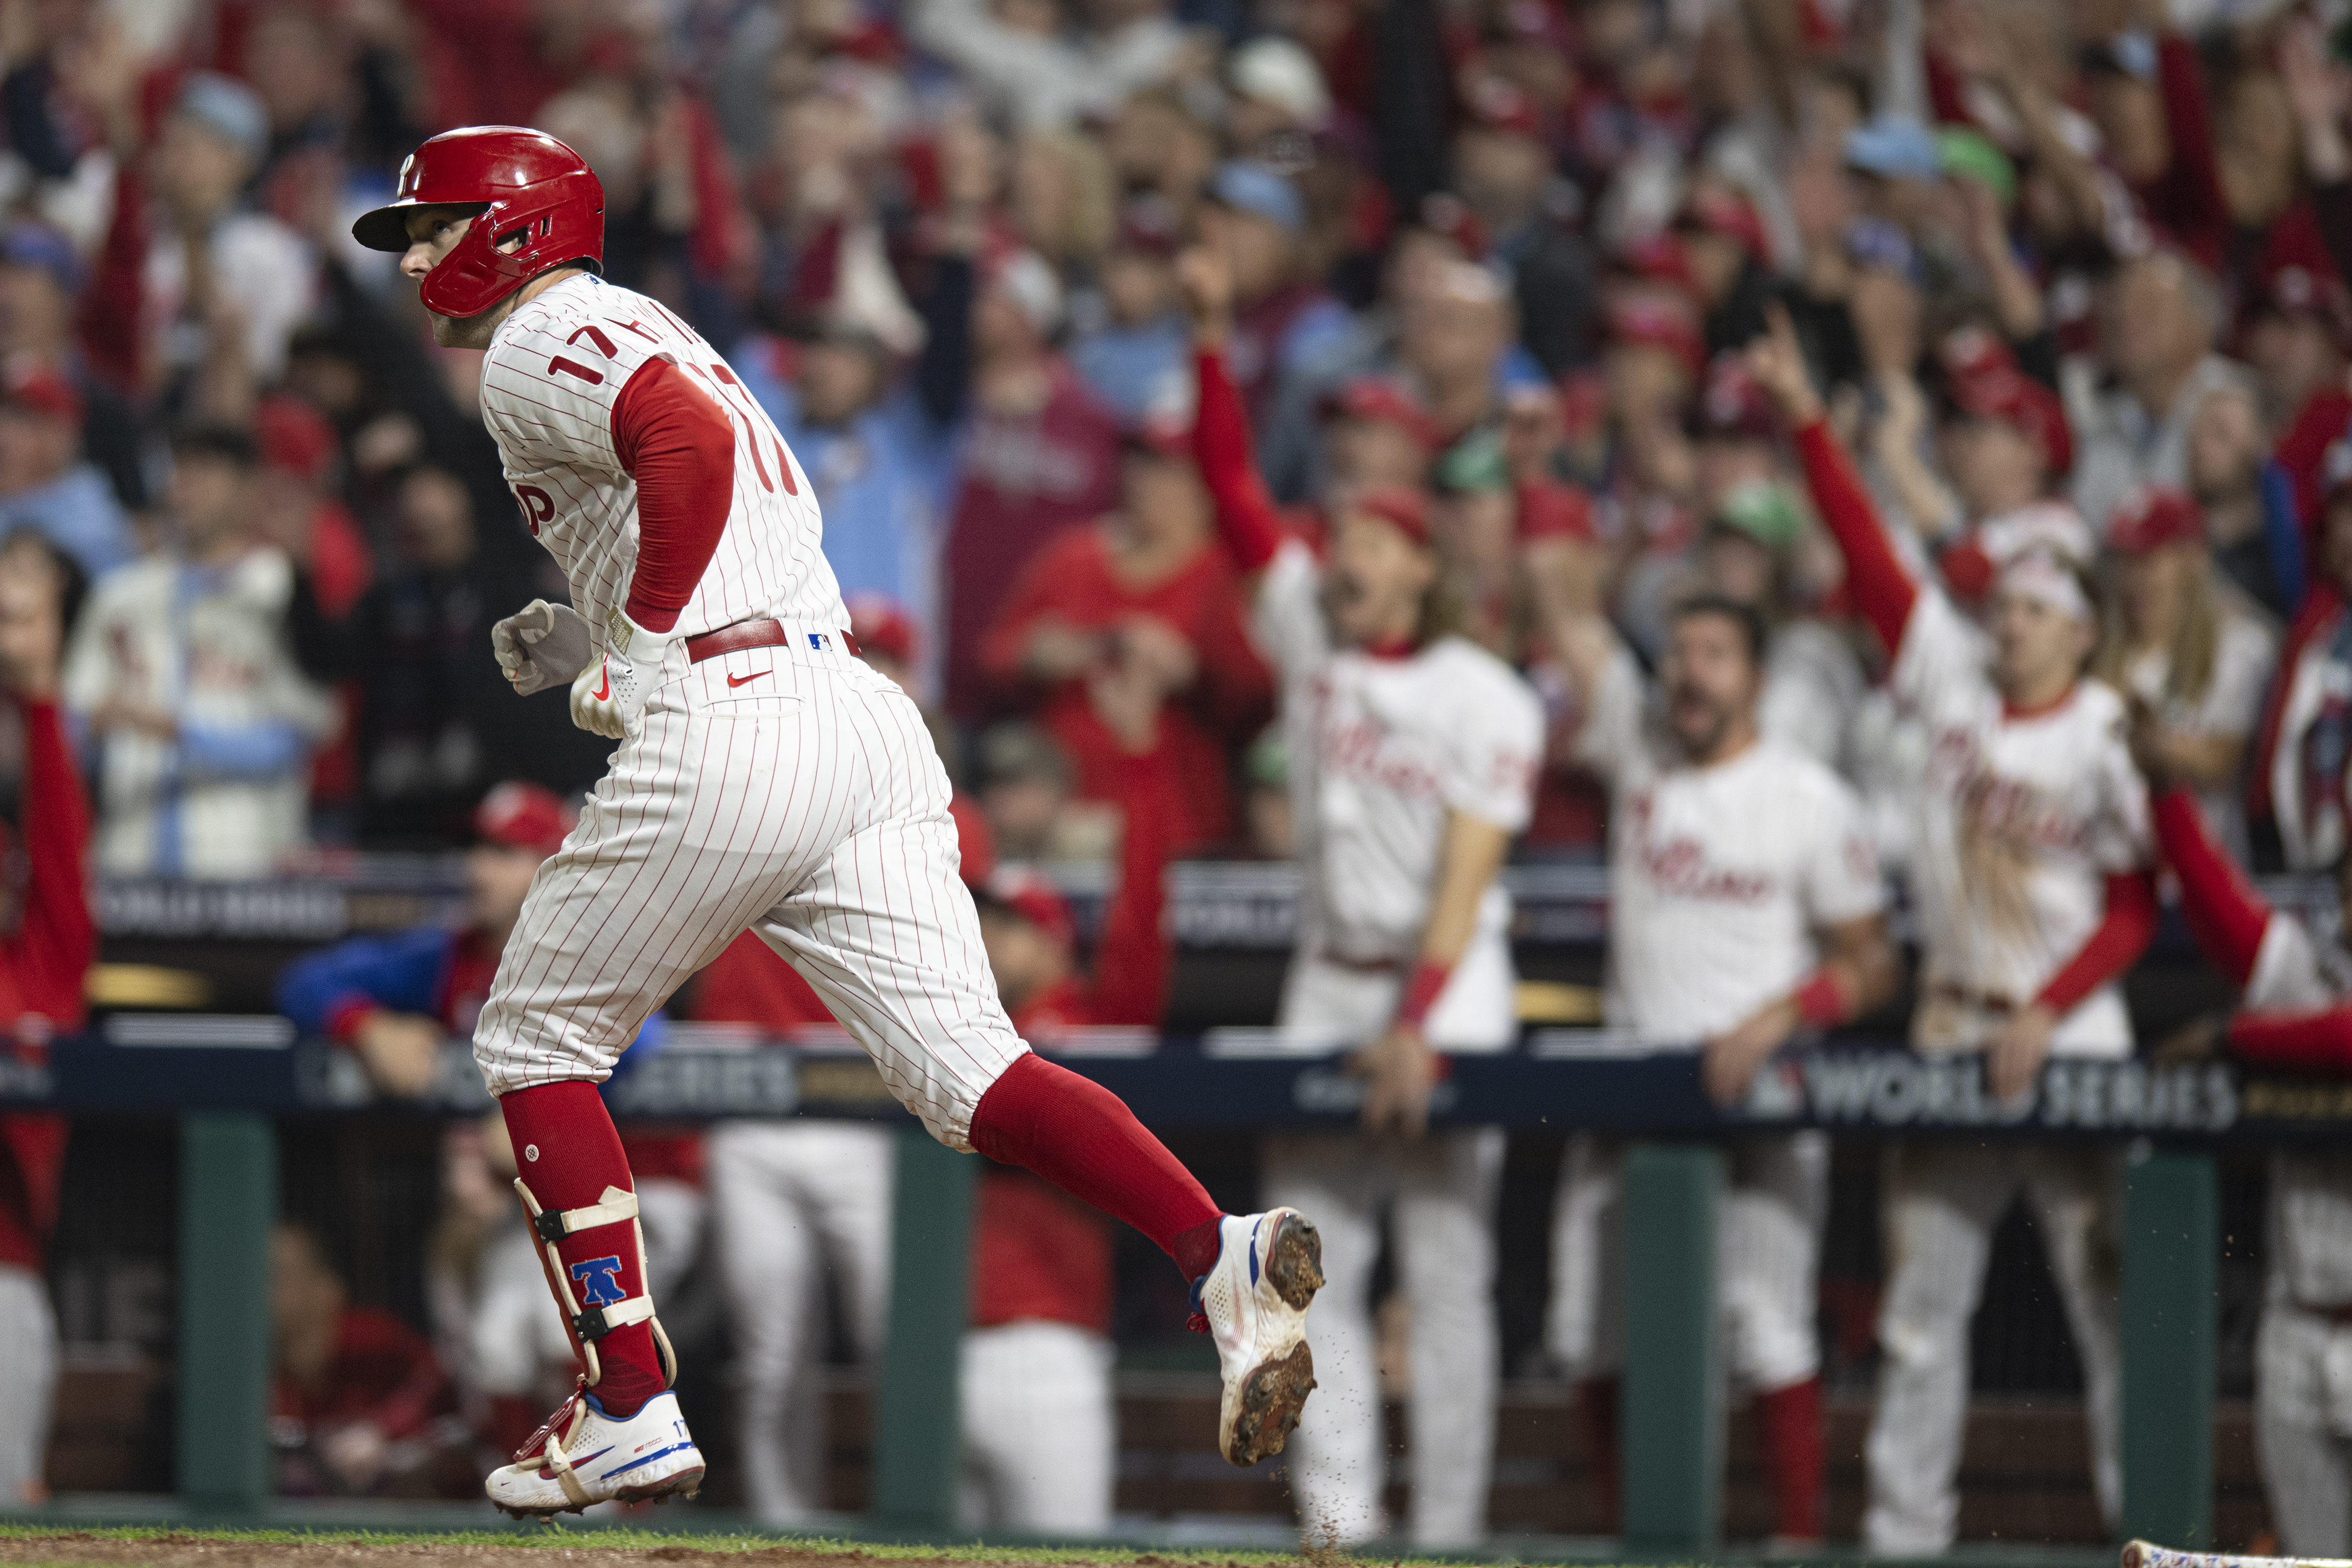 Phillies make history with 5 homers off Astros starter in Game 3 win